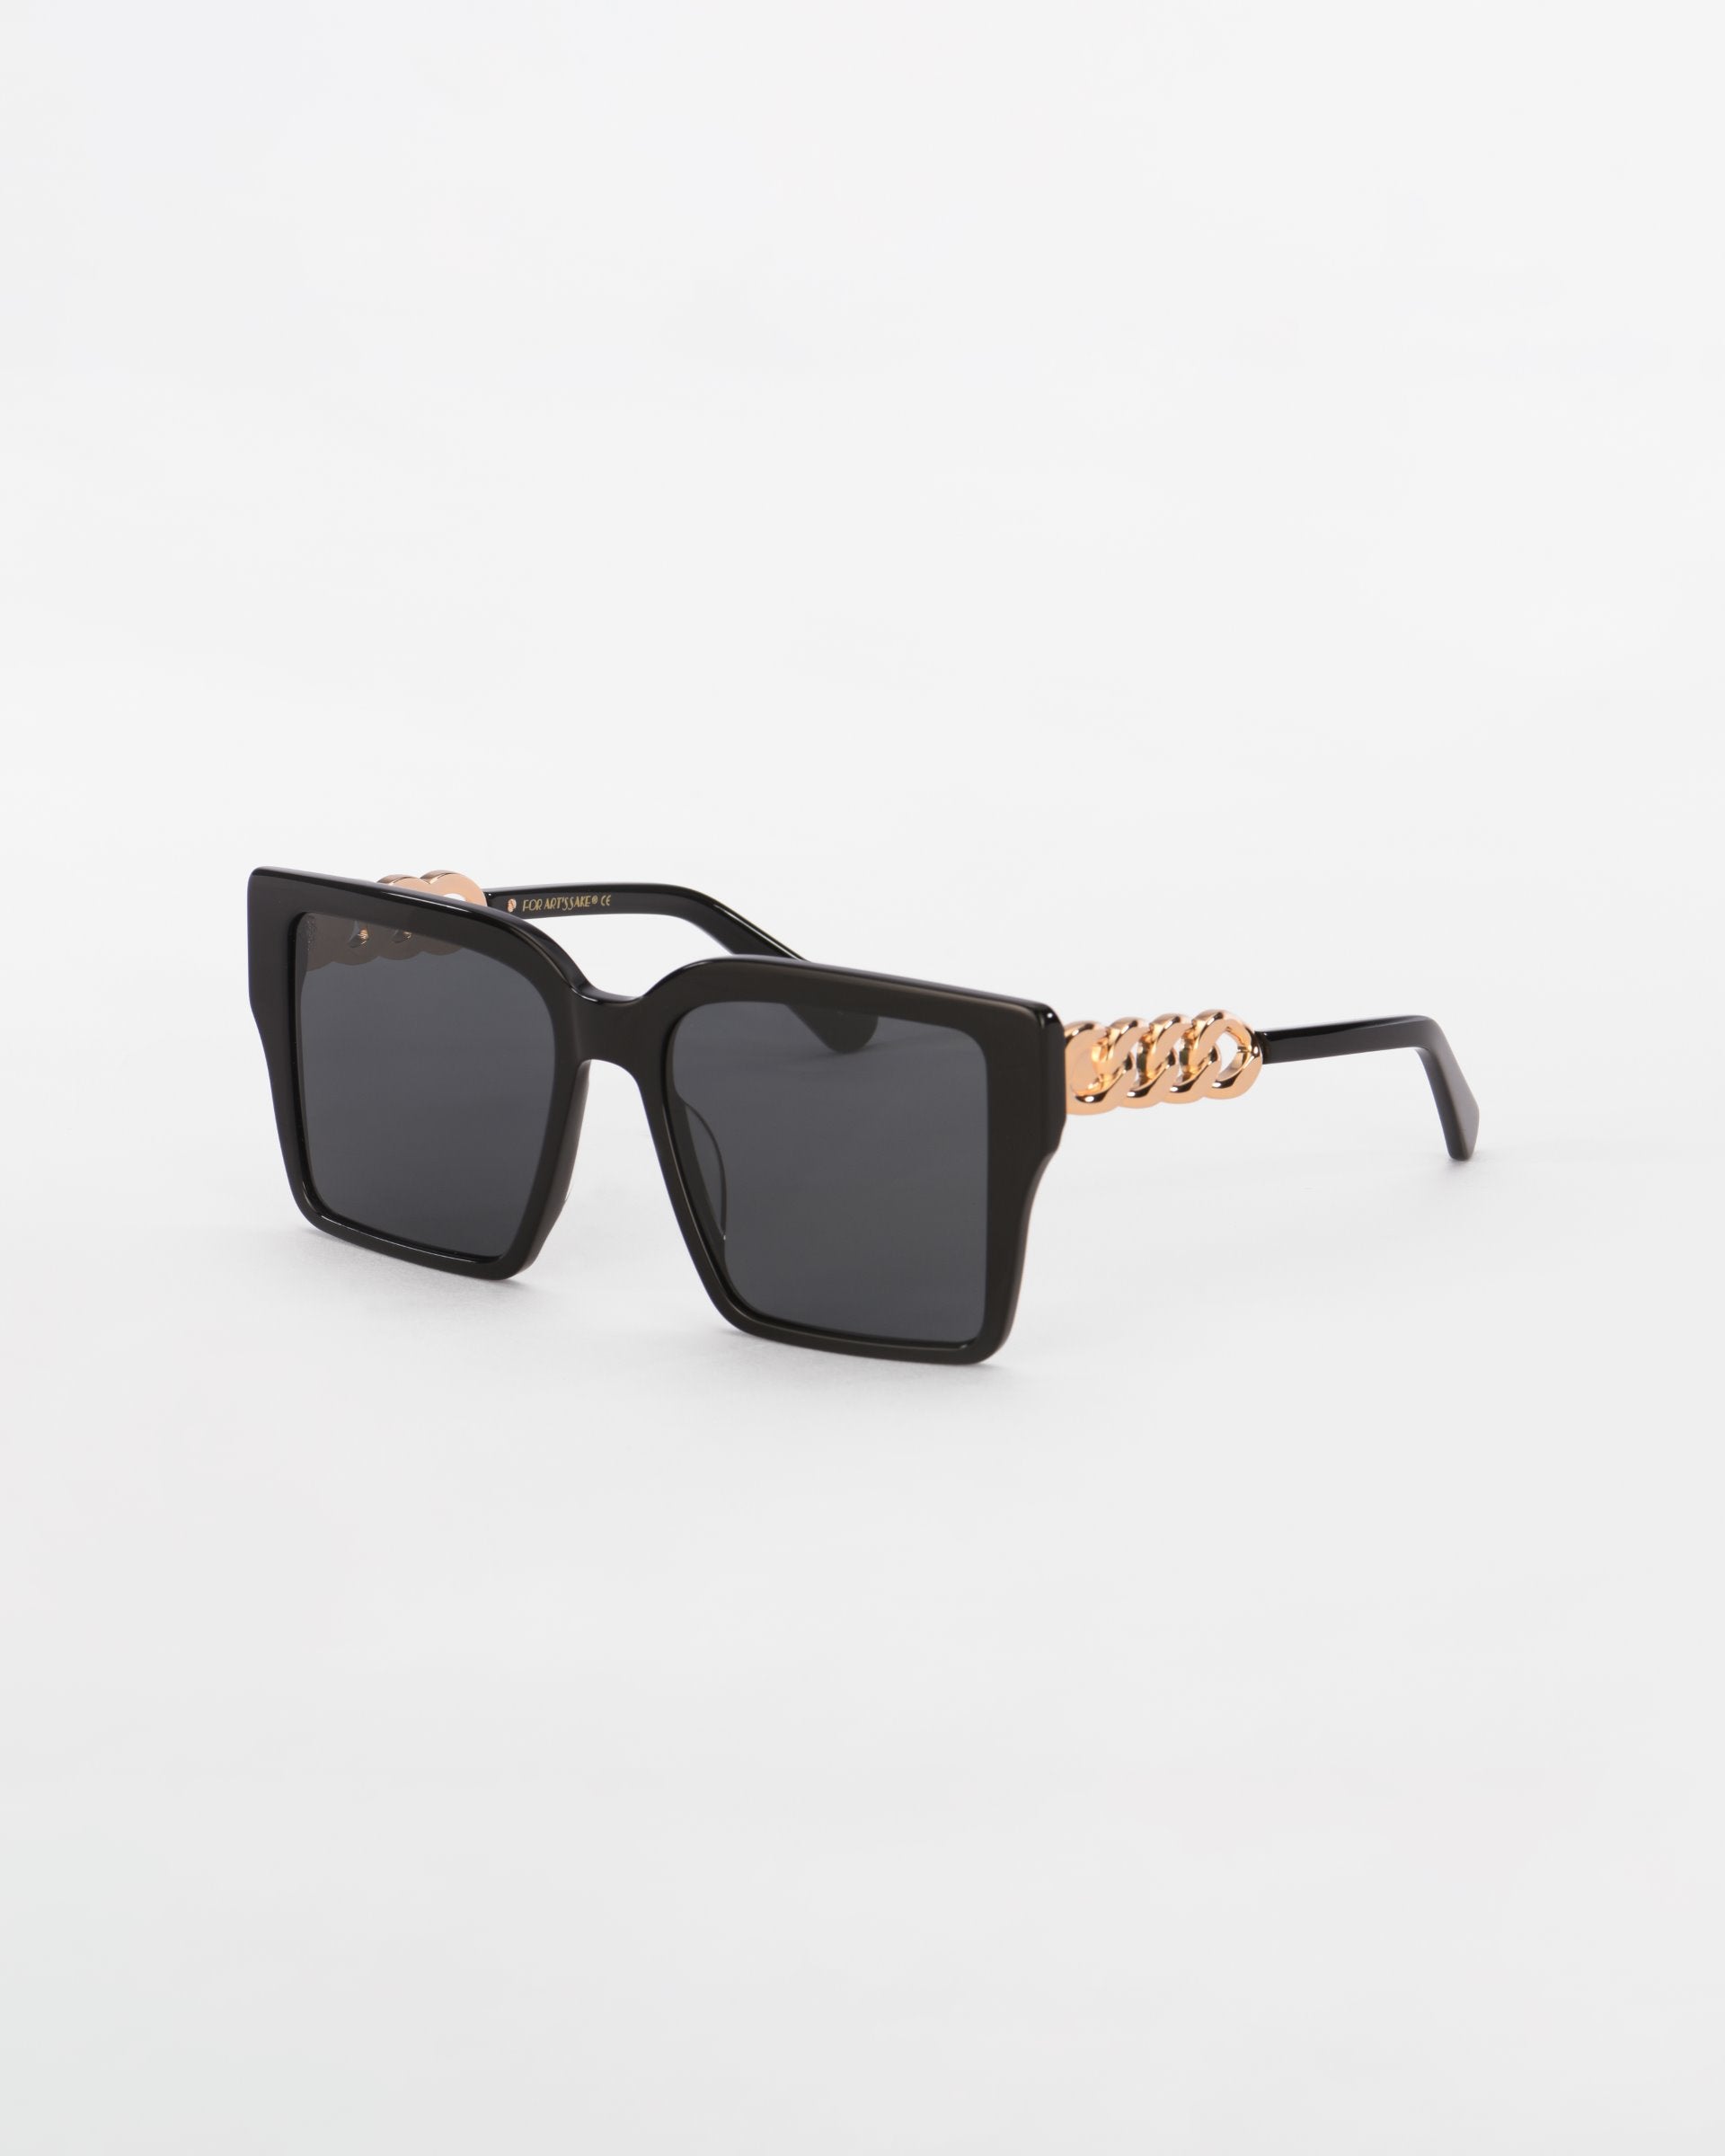 A pair of stylish black oversized square sunglasses named Castle from For Art&#39;s Sake® with ultra-lightweight dark lenses against a white background. The temples are adorned with an 18-karat gold plated chain detail, adding a touch of elegance to the modern design.